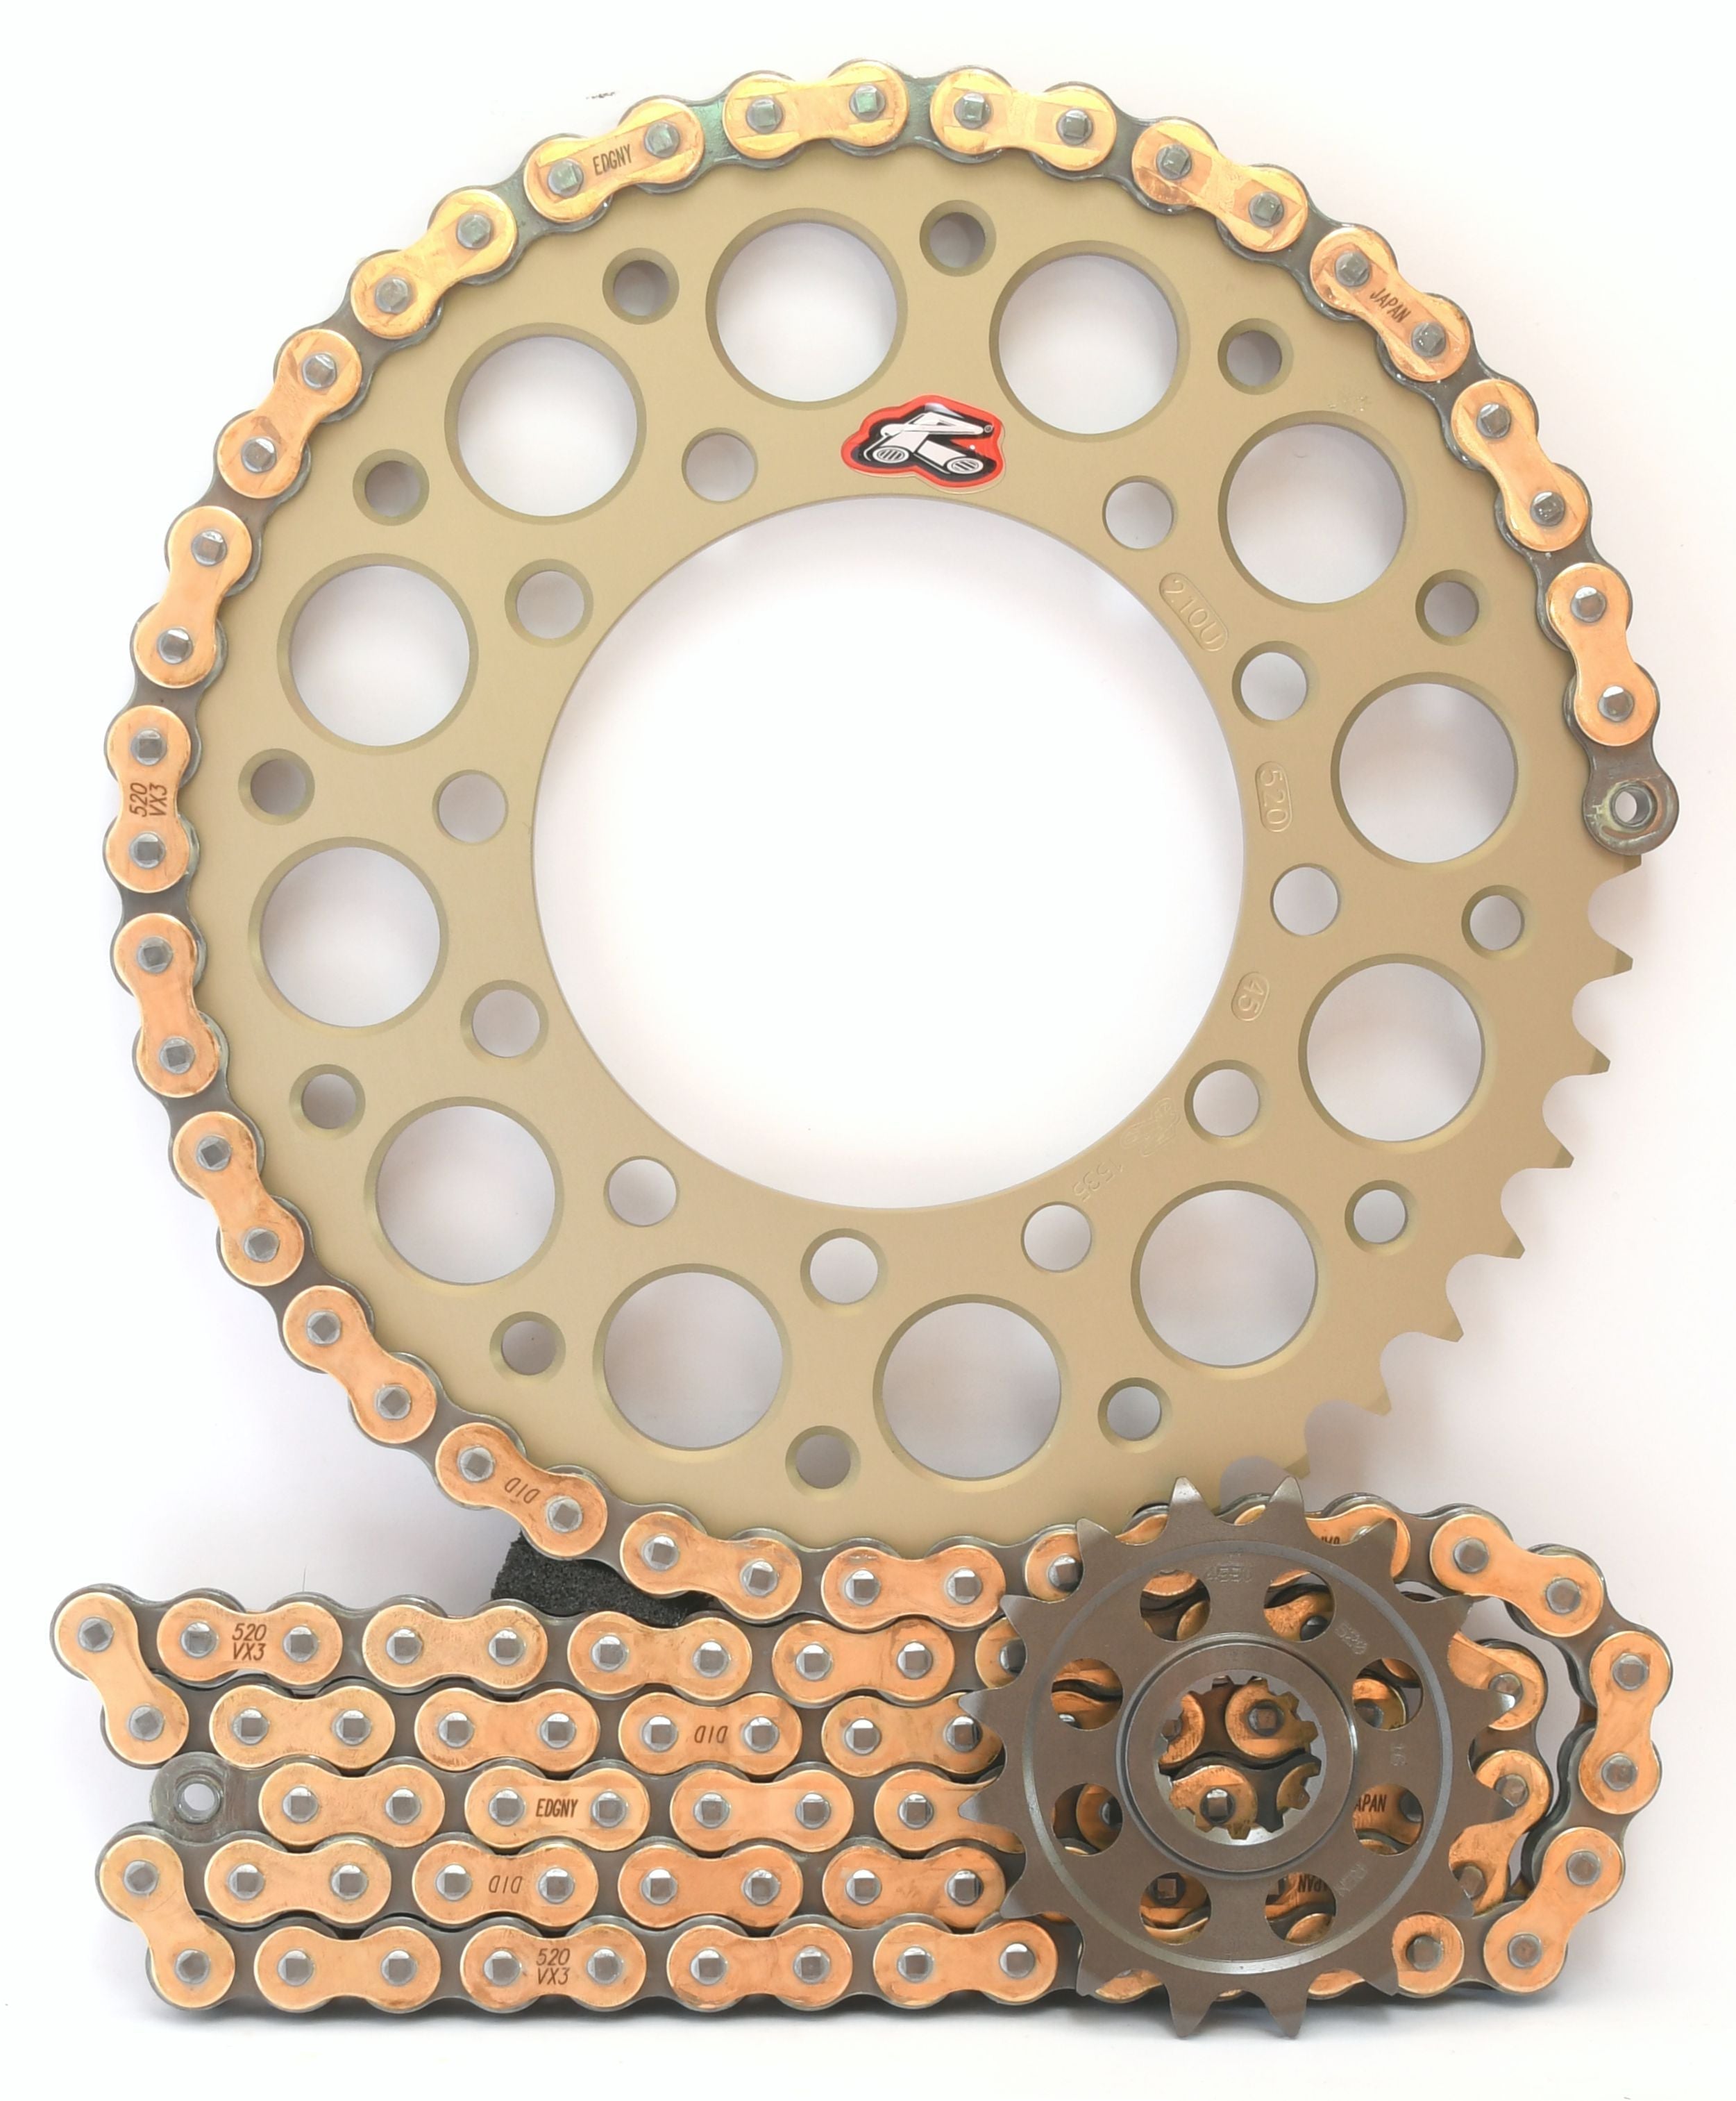 Renthal Ultralight and DID Chain & Sprocket Kit 520 Conversion for GSX-R750 2006-2010 - Standard Gearing